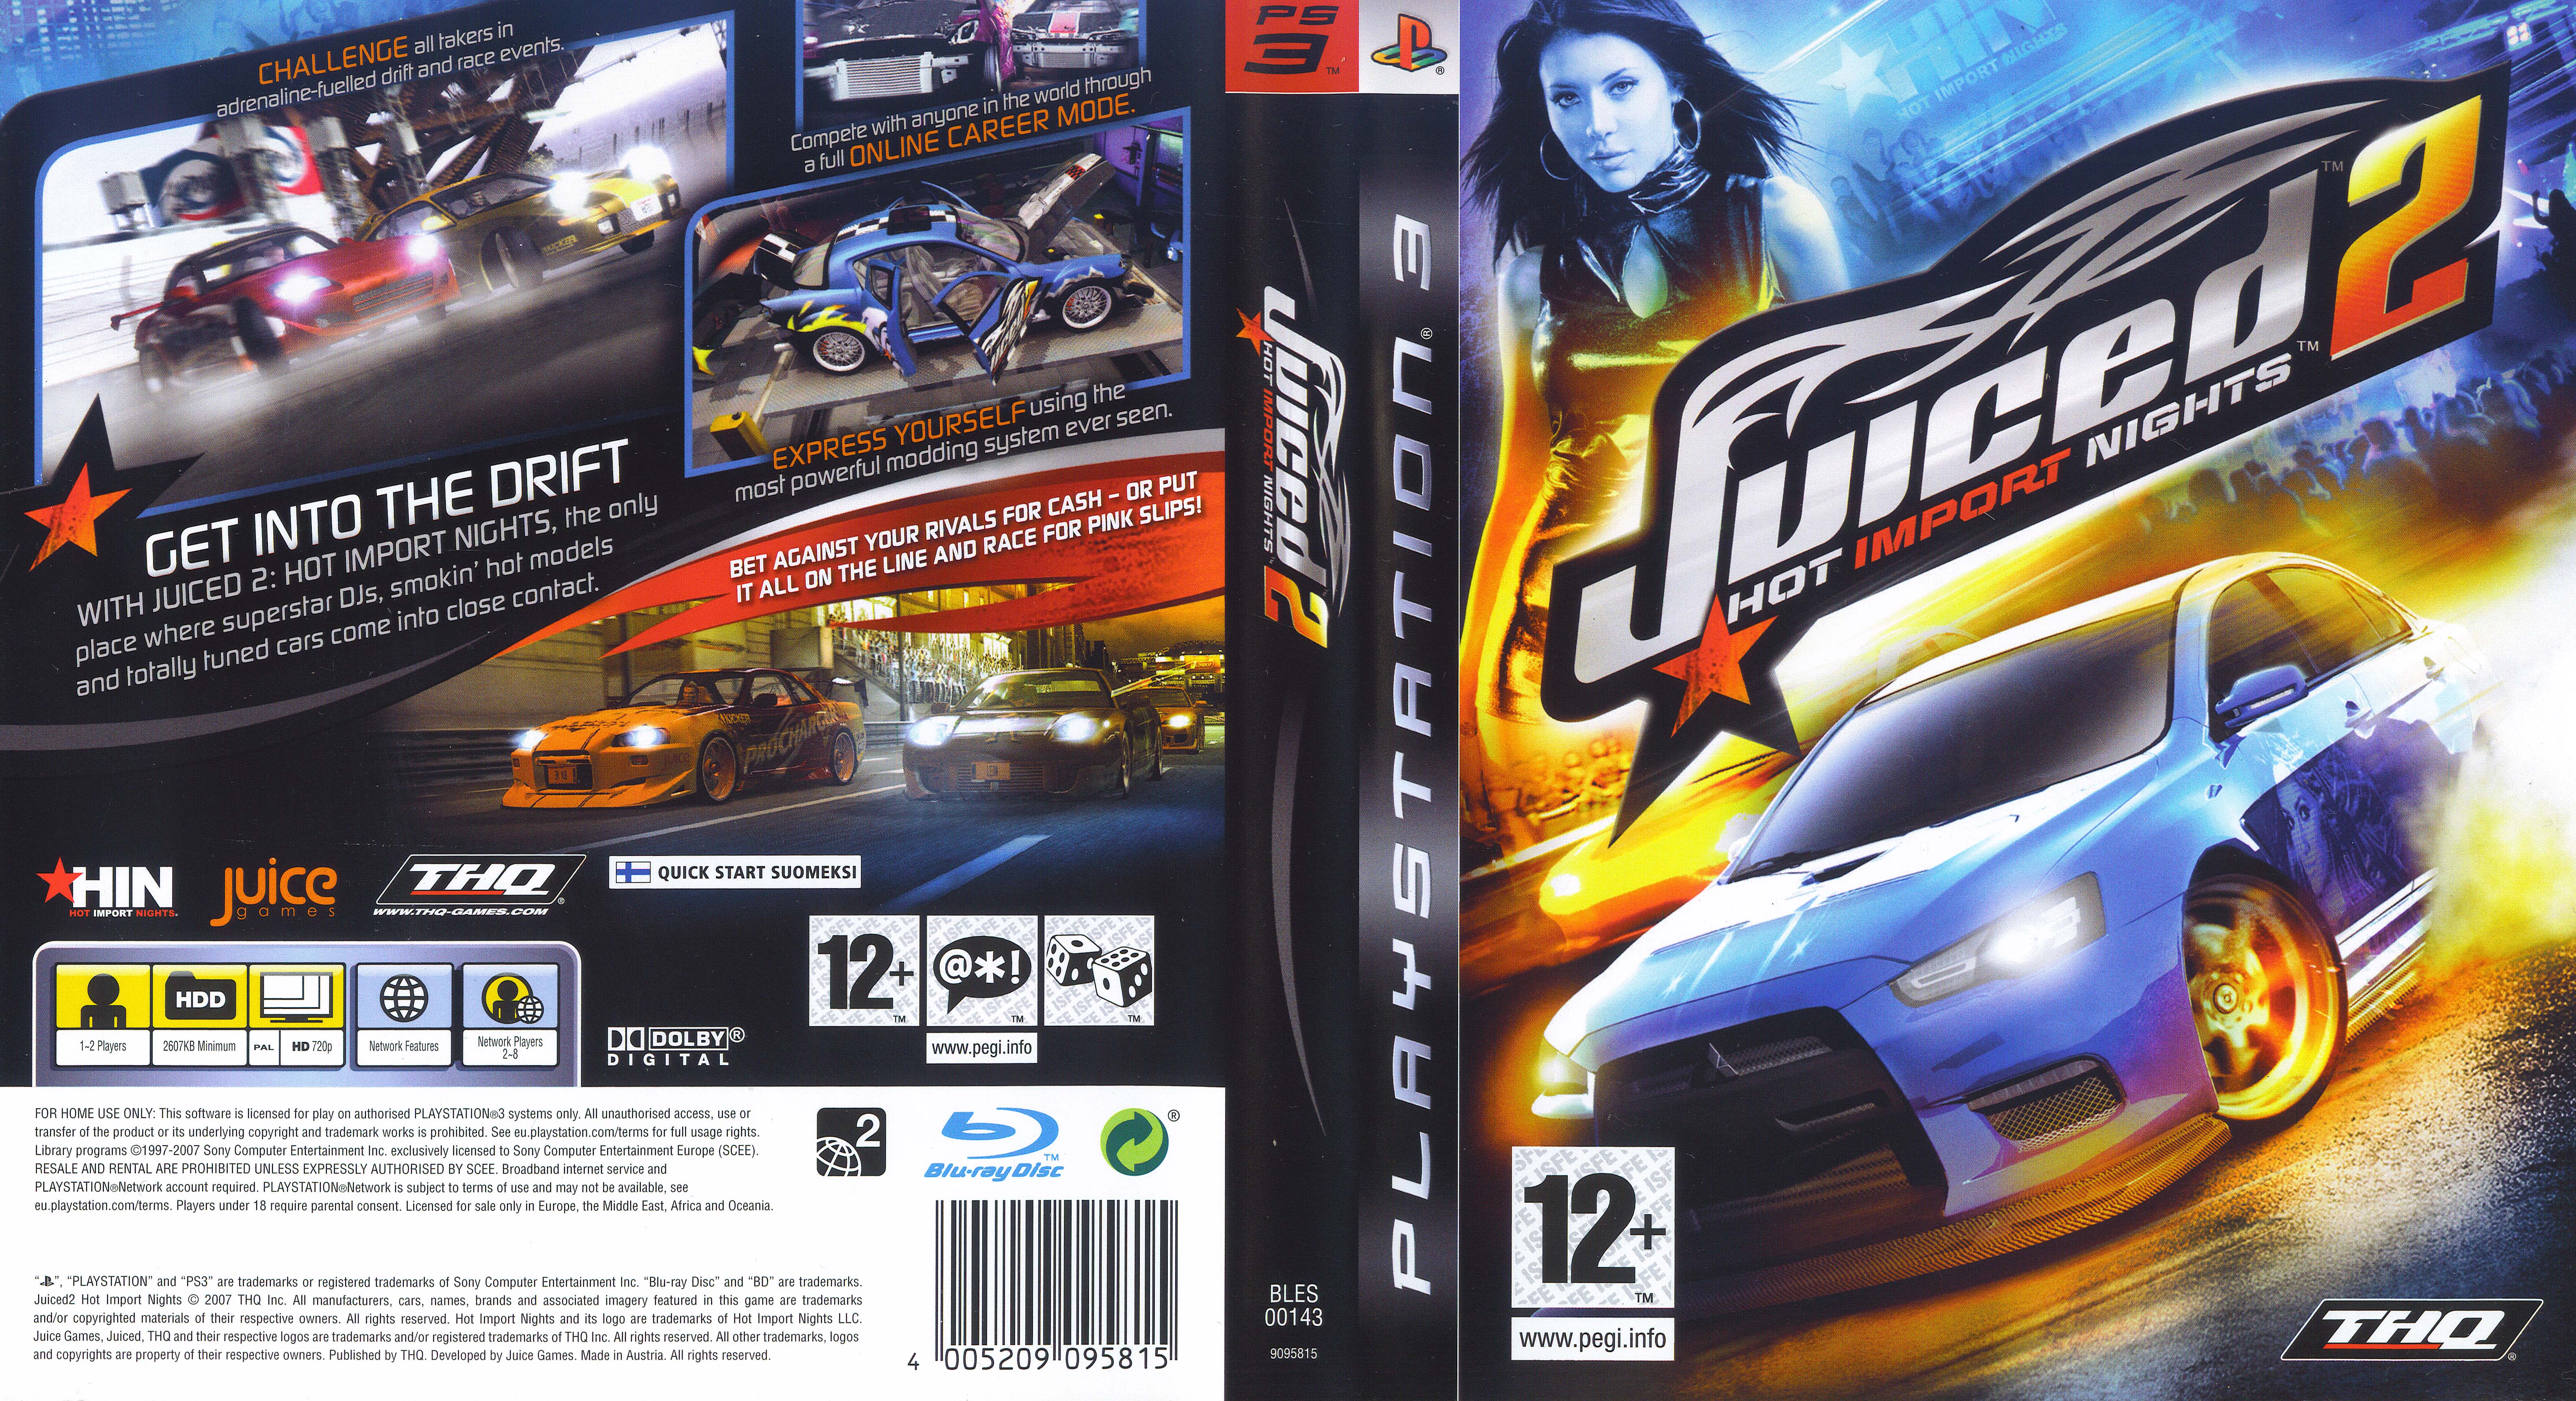 Juiced_2__Hot_Import_Nights-front-ps3-www.GetCovers.net_.jpg